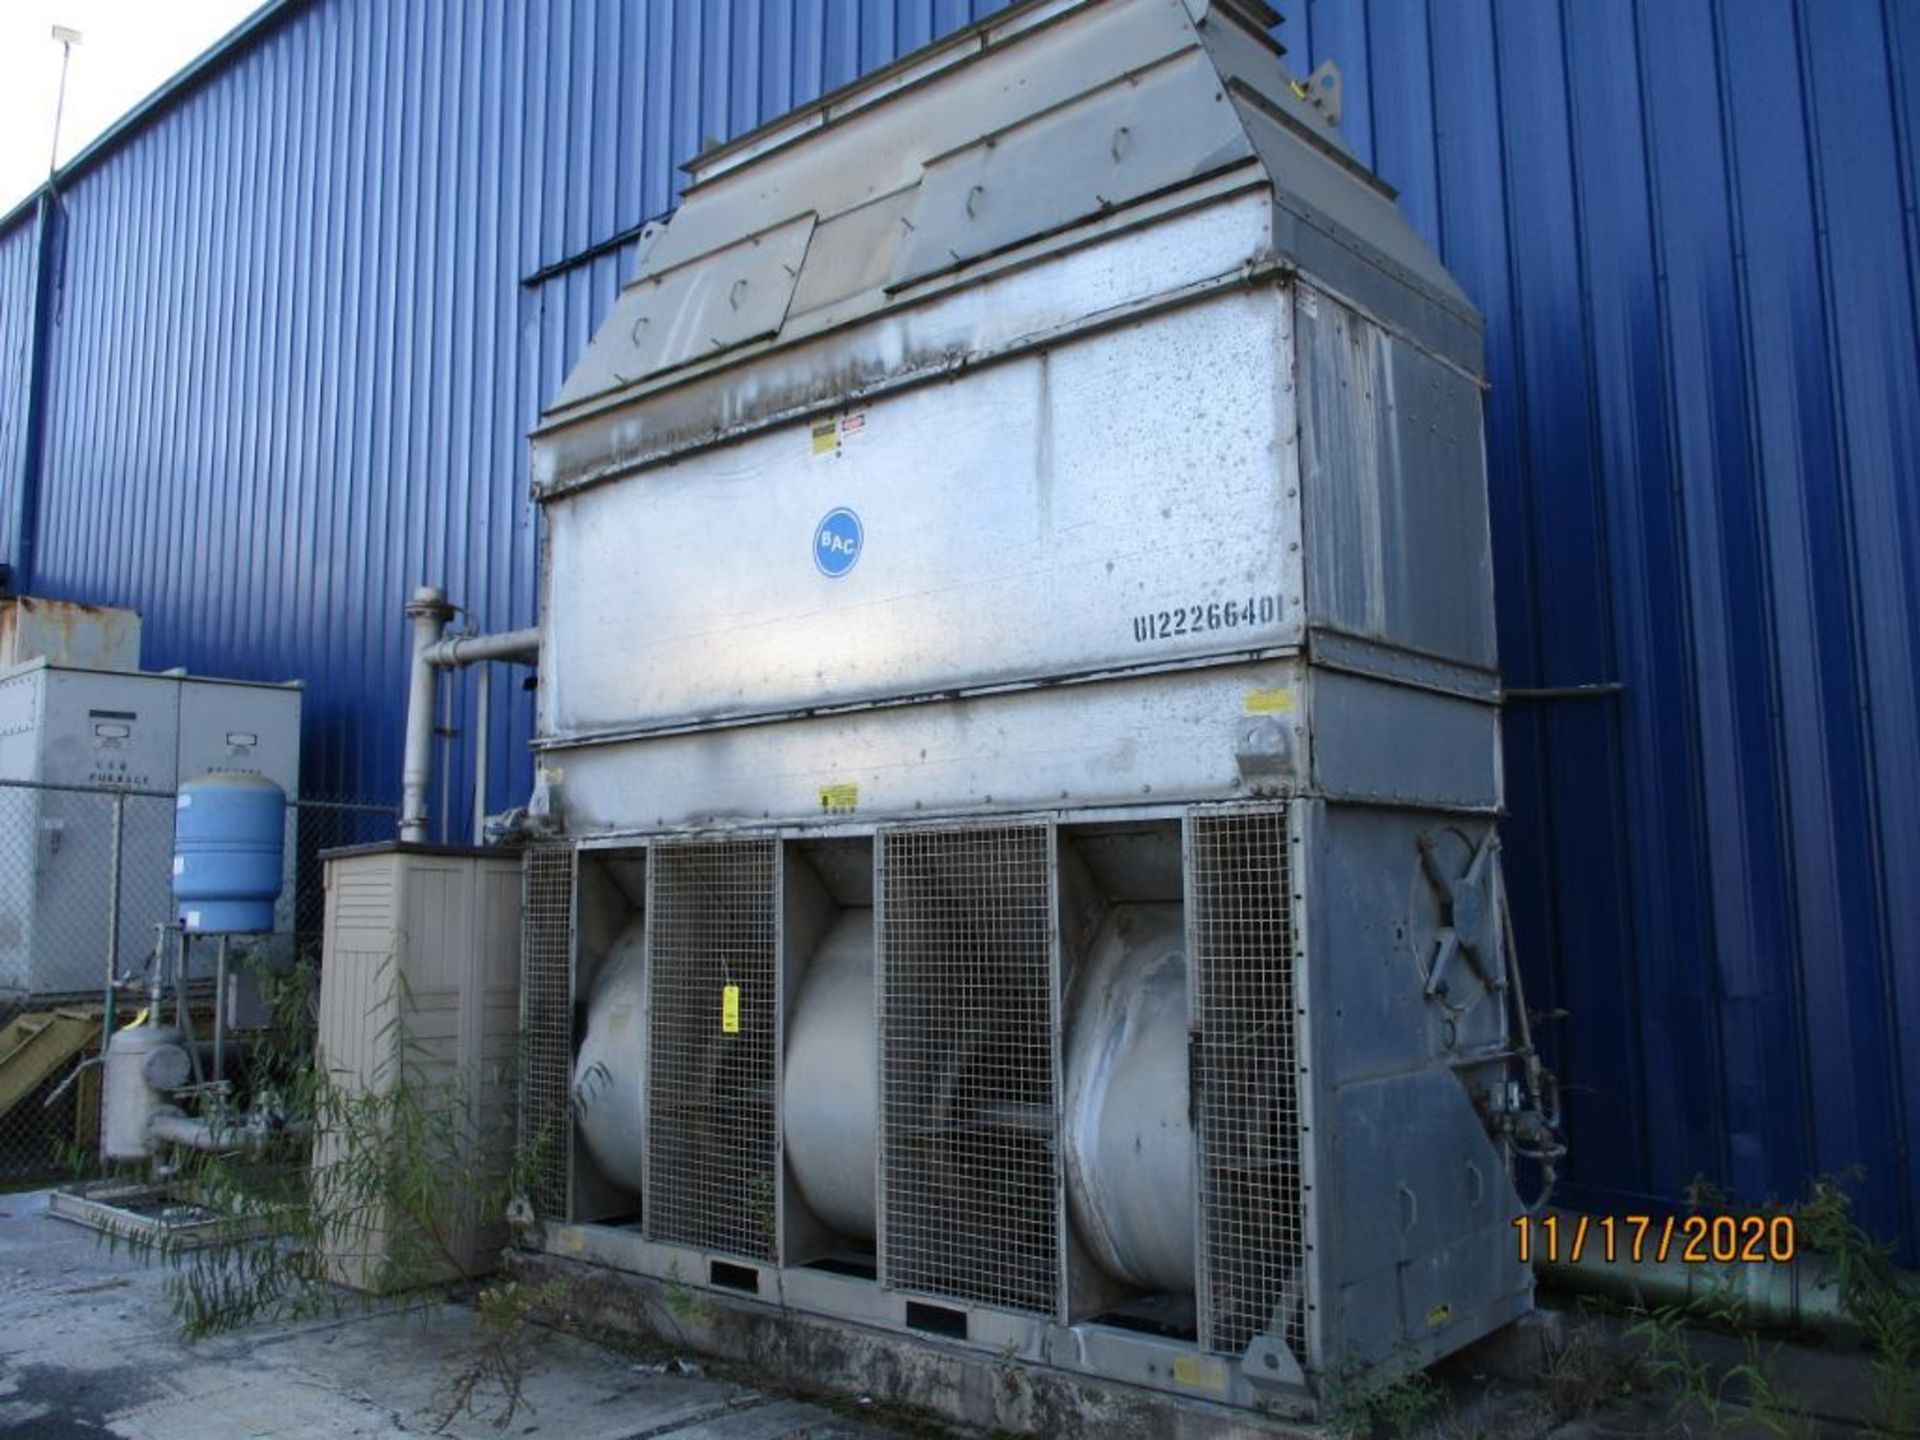 BAC Cooling Tower Model BF1-048-316, S/N U122266401-01, with New Parts (for Inductotherm mainline